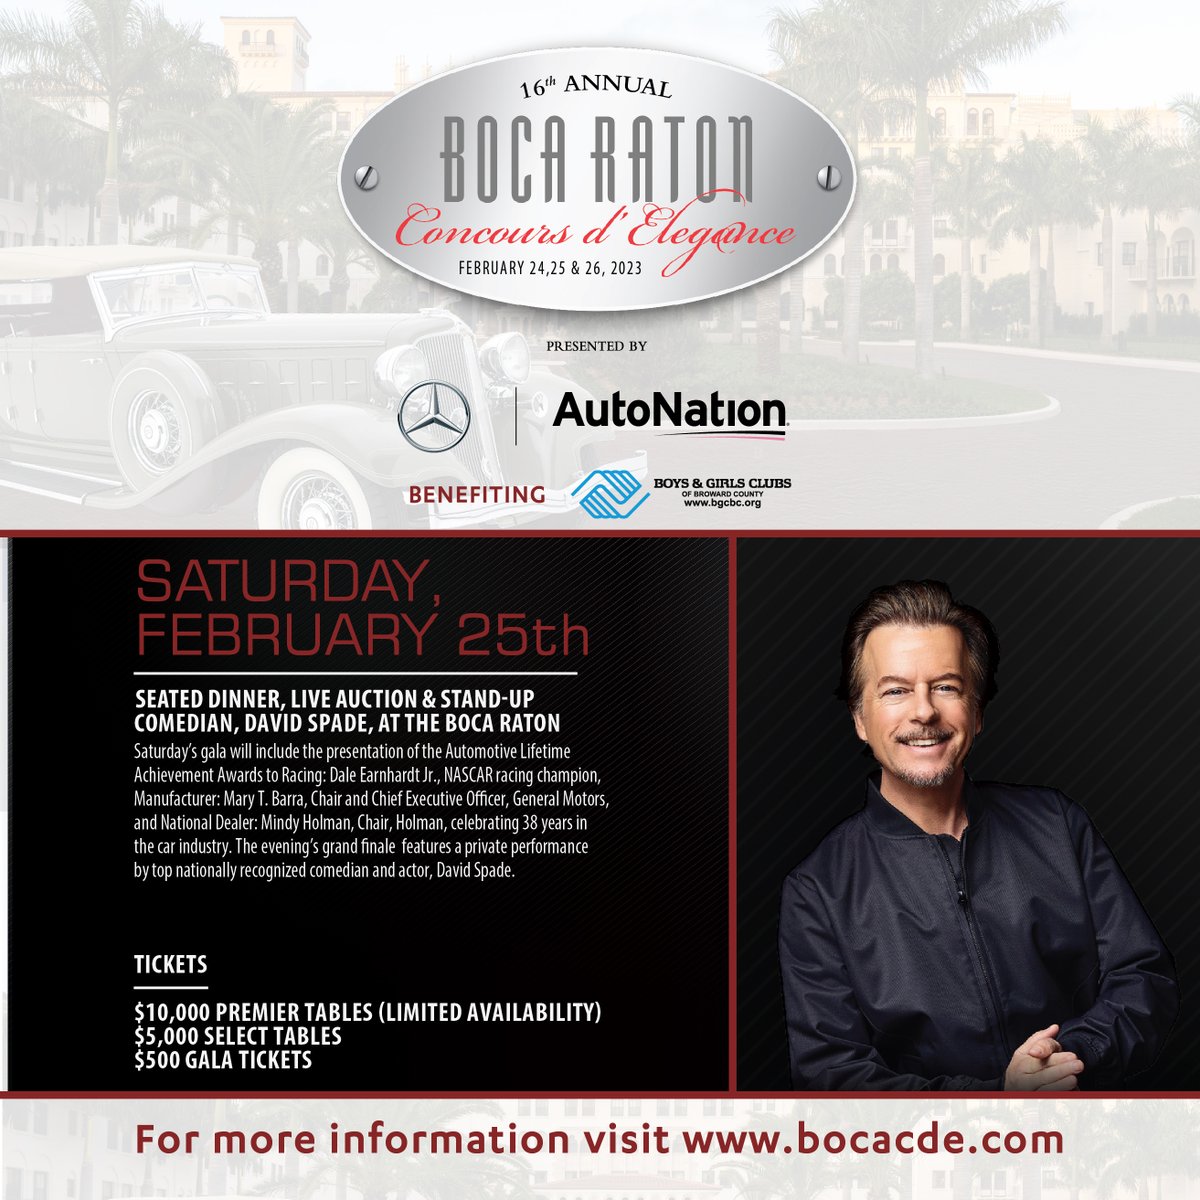 Join us at the spectacular 15th Annual Boca Raton Concours D' Elegance, Presented by Mercedes-Benz & Autonation Get your tickets here: tickets.bocaratonconcours.com/event/boca-rat…